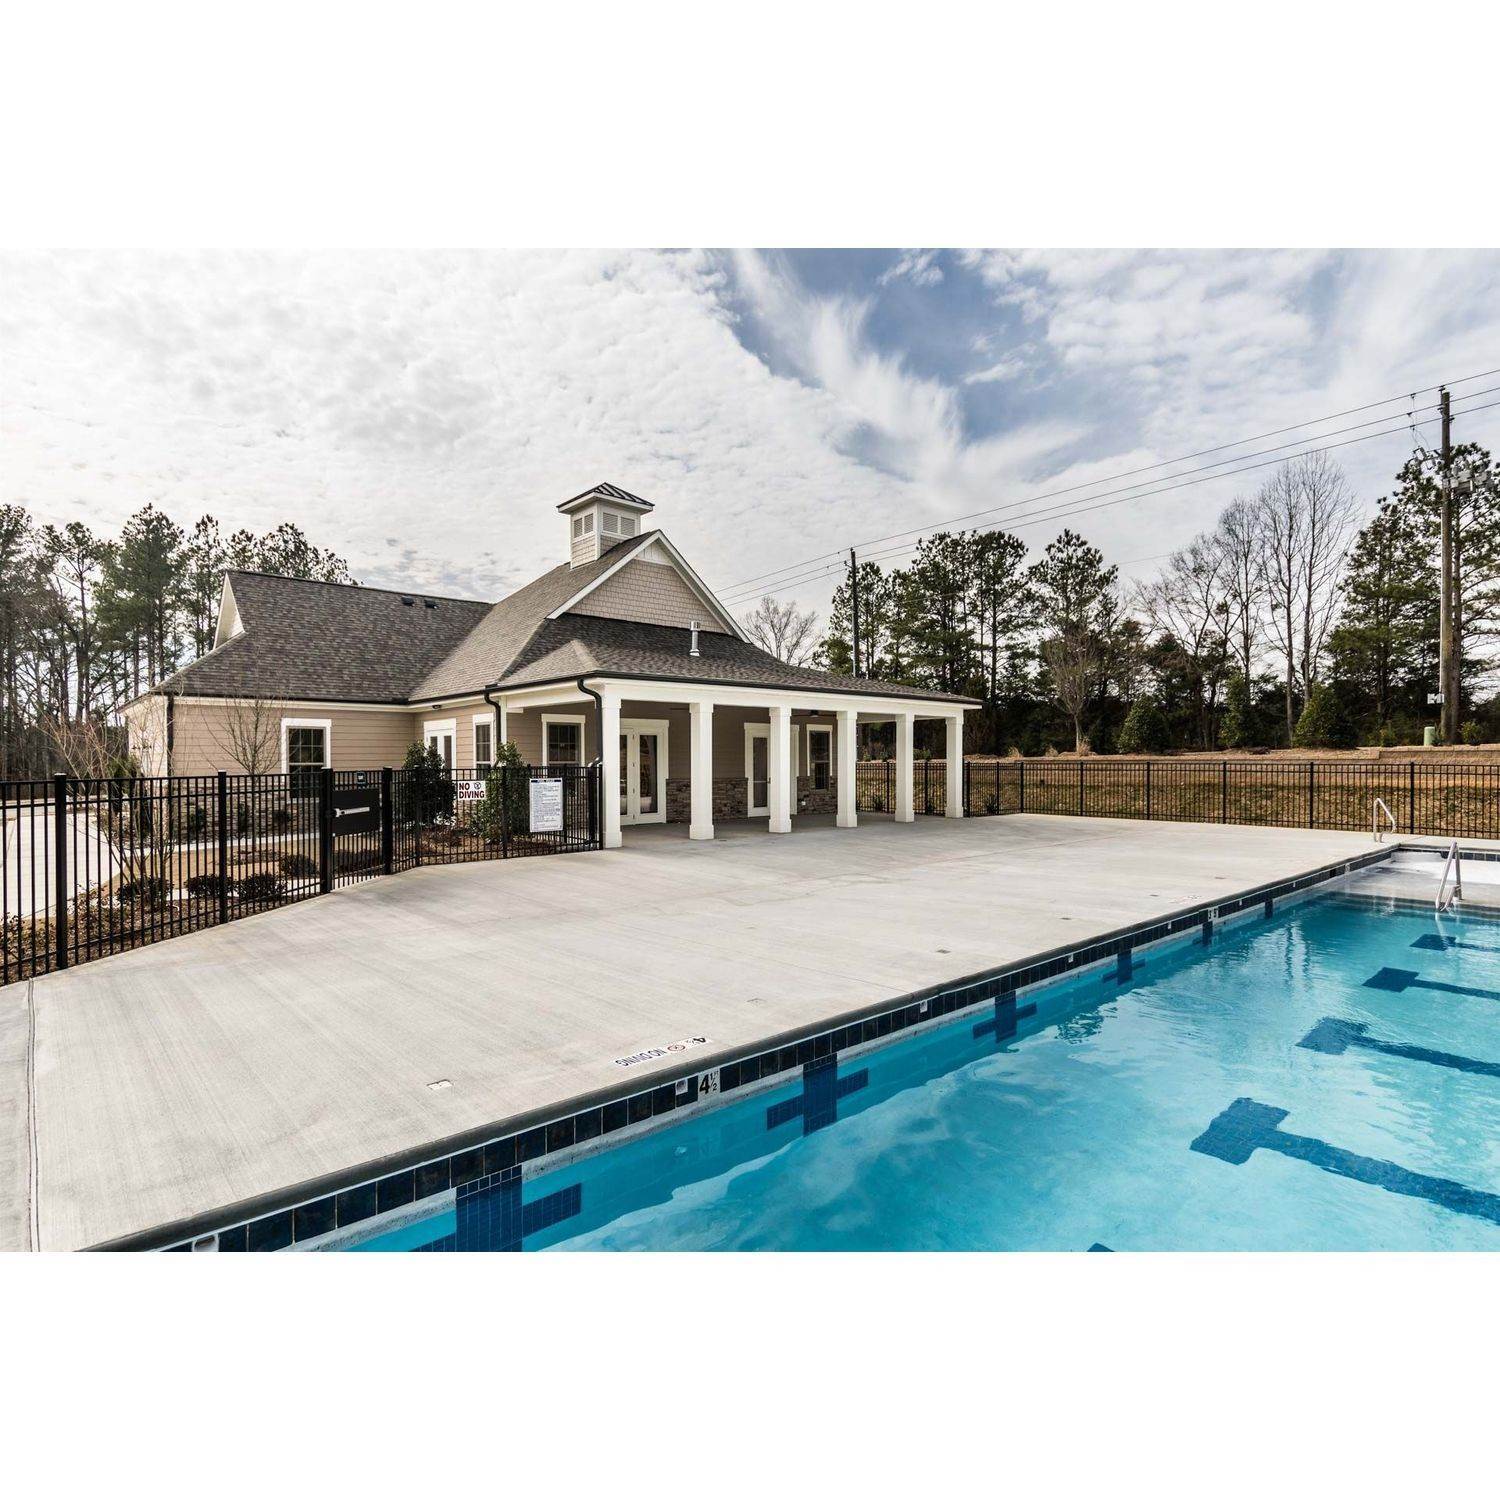 19. building at 720 Glenmere Dr, Knightdale, NC 27545